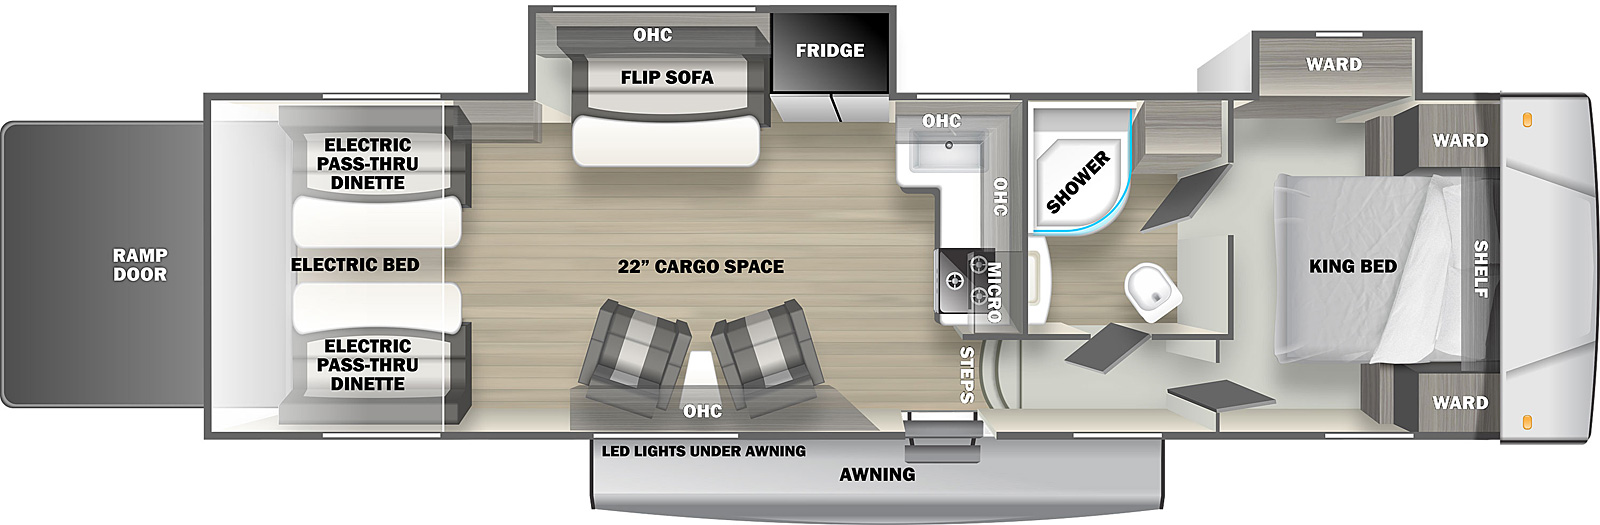 The Stealth SA3421G is a toy hauler fifth wheel with one entry door, a rear ramp door, two slides on the off-door side, and awning on the exterior. Inside, a walkaround king bed is located in the front of the unit, with wardrobe cabinets on either side and  cabinets overhead.There is a slideout on the off-door bedroom wall that contains a wardrobe vanity. The bedrdoom has two doors, one into the bathroom and one into a short hallway with steps that opens to the main living area. The bathroom contains a sink, medicine cabinet, linen cabinet, commode, and glass radius shower. The kitchen countertop with sink, cooktop, and oven are located on the outside bathroom wall facing the rear of the RV, with cabinets and a microwave mounted overhead. Next to the kitchen area on the off-door wall is a slideout containing a double door refrigerator and flip sofa with half dinette table and overhead cabinets. Additional overhead cabinets are mounted on the door side. A pair of upholstered chairs with small table between them are located underneath these cabinets. In the rear of the unit are two flip sofa benches, one on either side, with a split dinette table between them. These convert to a standard electric bed. This trailer provides 22' of interior cargo space.